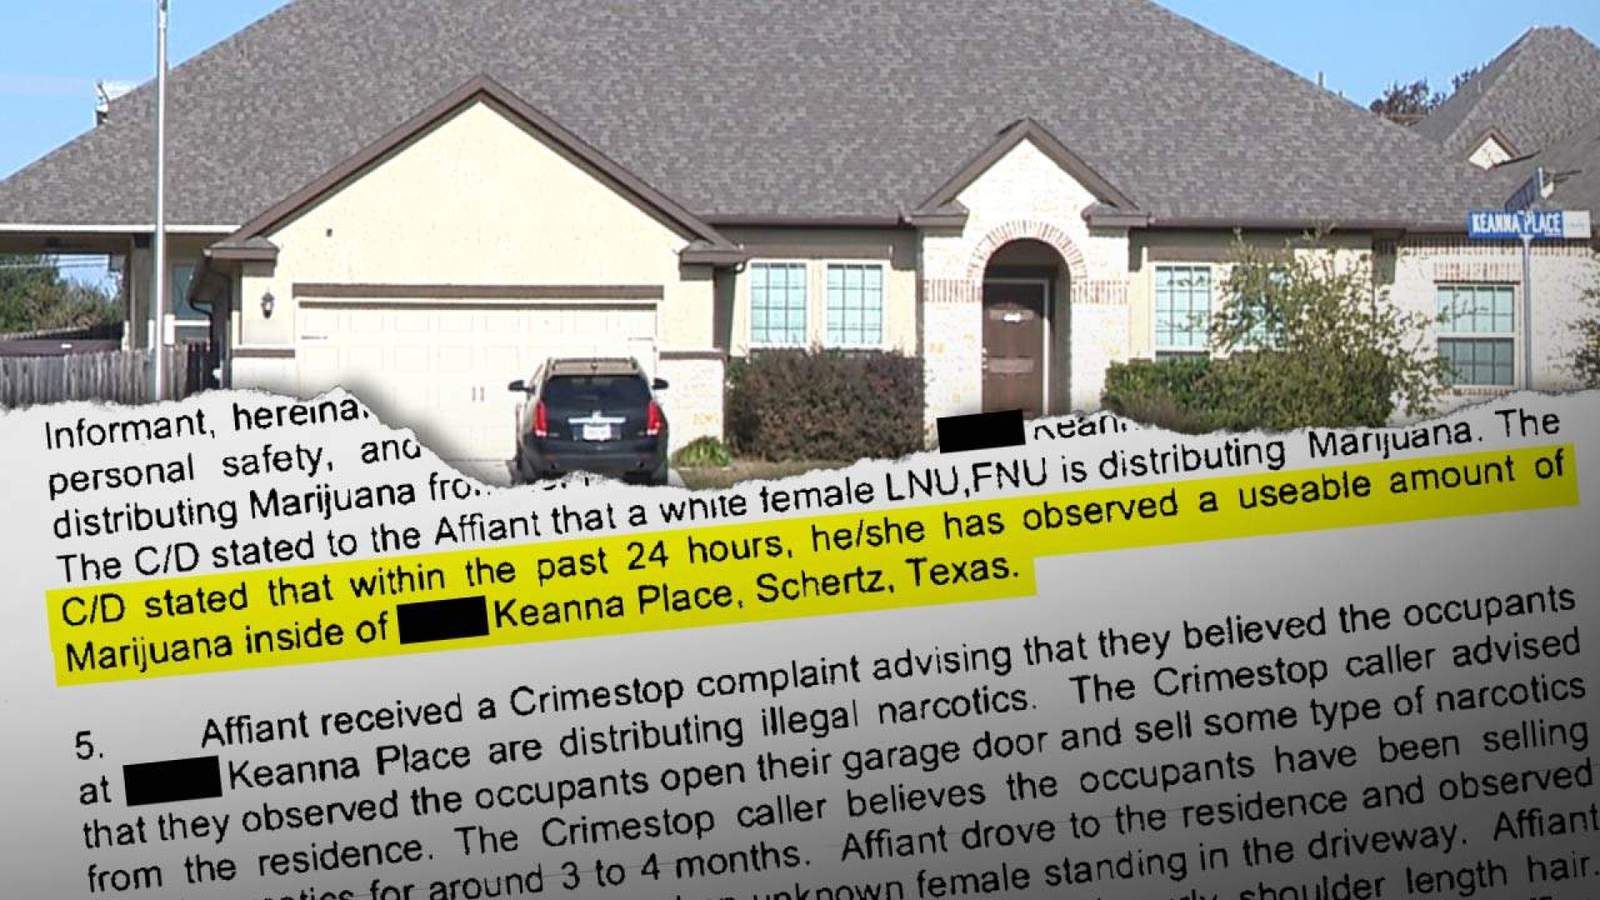 Months before controversial arrest, Schertz detective used false information to raid home of Zekee Rayford